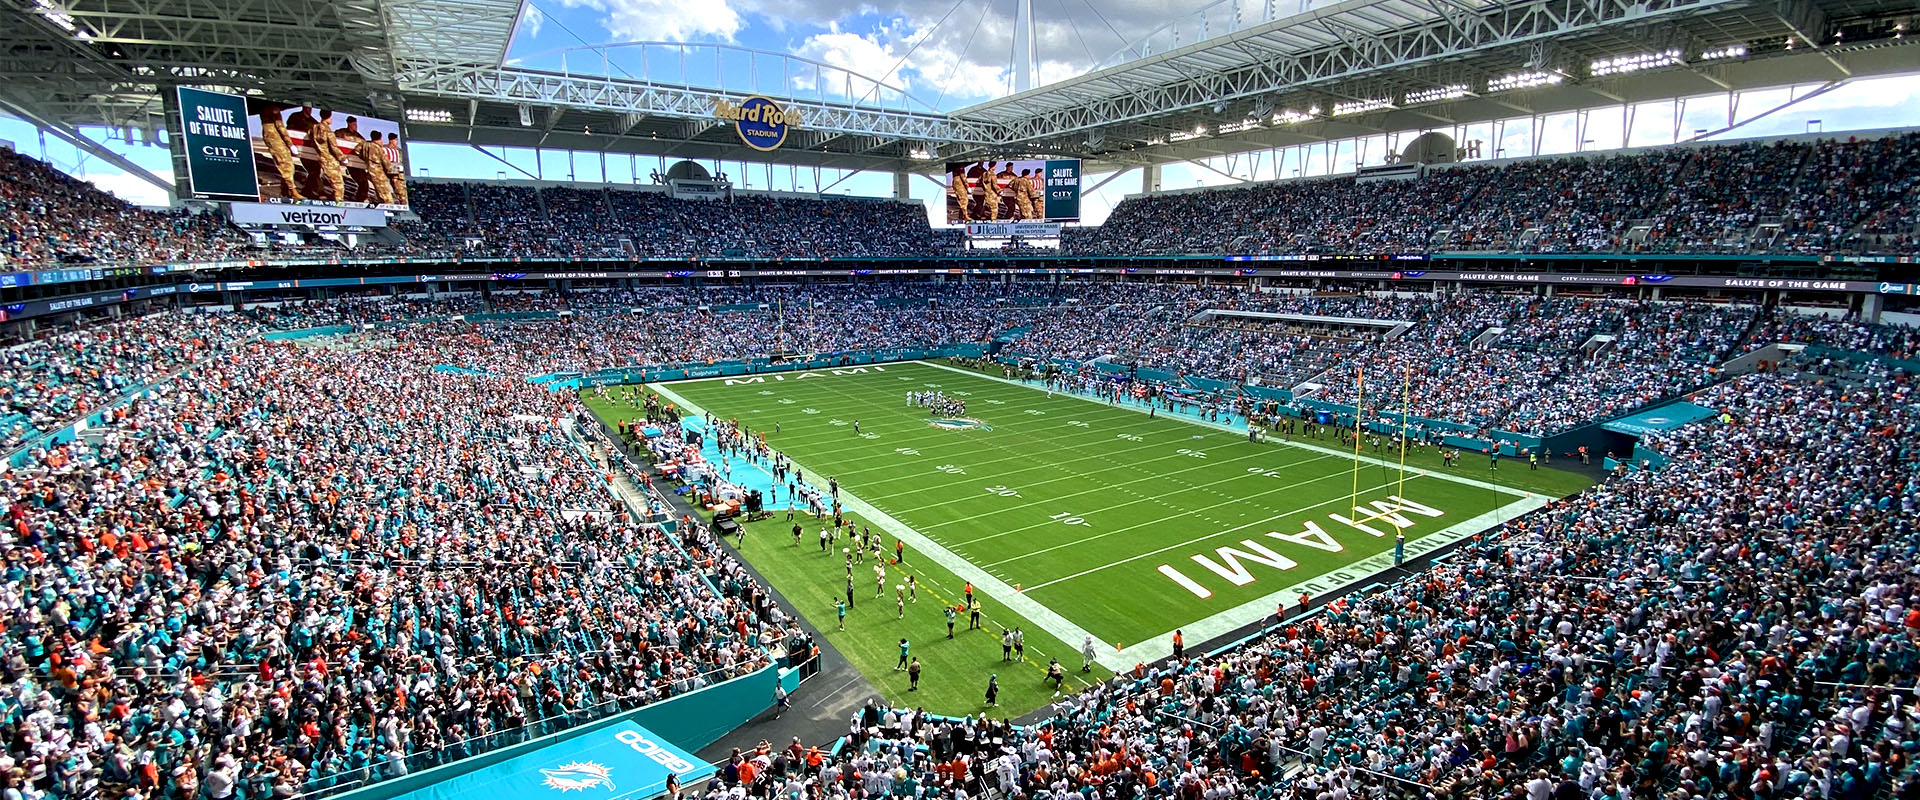 the next dolphins game